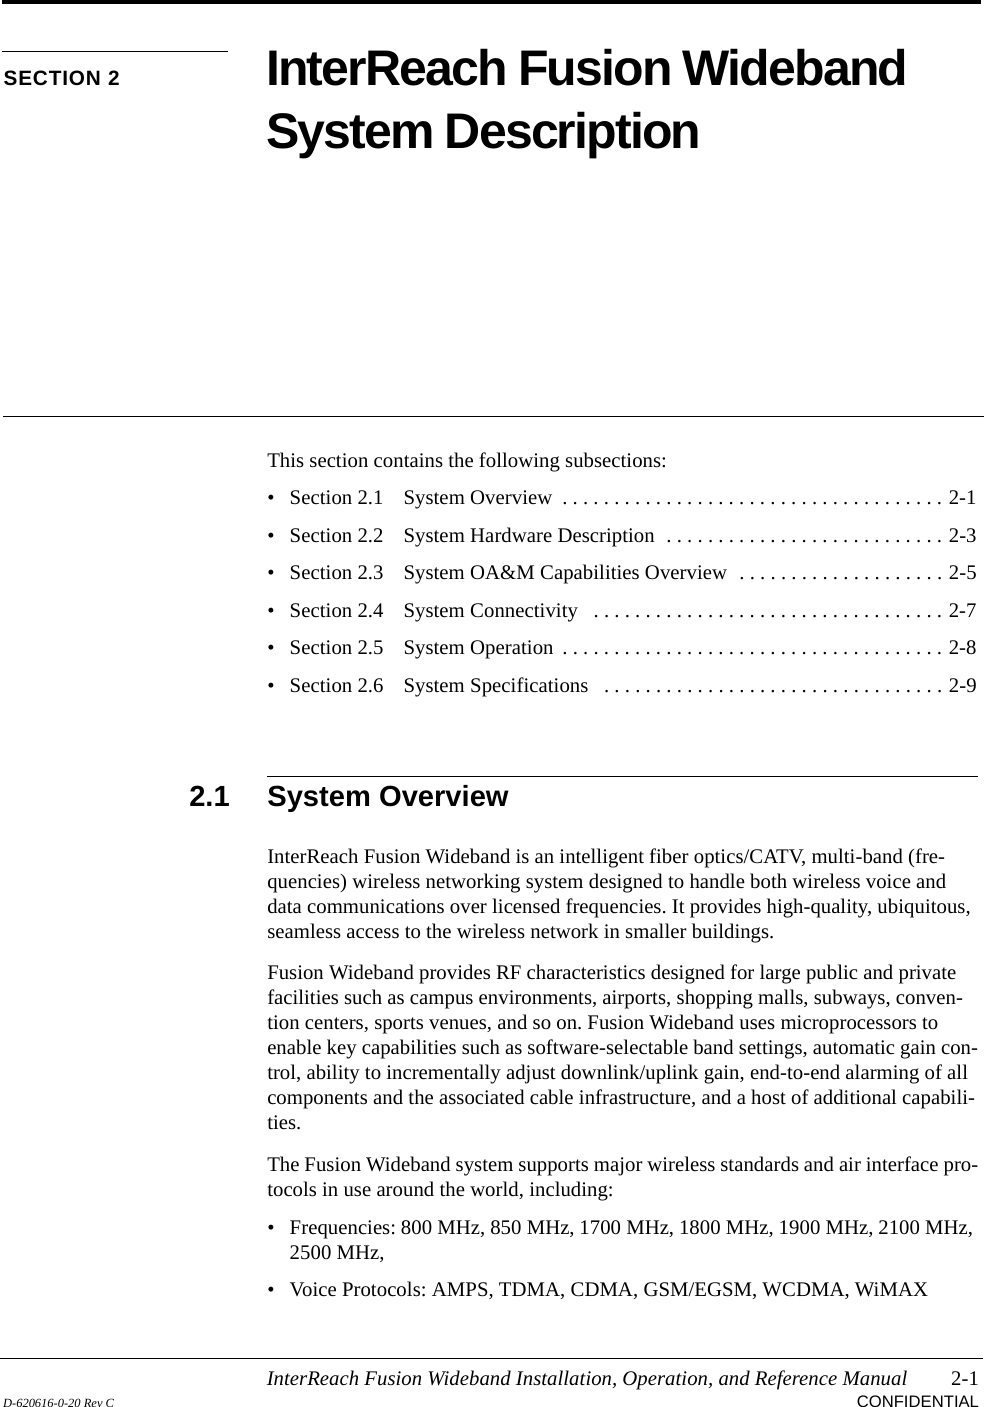 InterReach Fusion Wideband Installation, Operation, and Reference Manual 2-1D-620616-0-20 Rev C CONFIDENTIALSECTION 2 InterReach Fusion Wideband System DescriptionThis section contains the following subsections:• Section 2.1   System Overview  . . . . . . . . . . . . . . . . . . . . . . . . . . . . . . . . . . . . . 2-1• Section 2.2   System Hardware Description  . . . . . . . . . . . . . . . . . . . . . . . . . . . 2-3• Section 2.3   System OA&amp;M Capabilities Overview  . . . . . . . . . . . . . . . . . . . . 2-5• Section 2.4   System Connectivity   . . . . . . . . . . . . . . . . . . . . . . . . . . . . . . . . . . 2-7• Section 2.5   System Operation  . . . . . . . . . . . . . . . . . . . . . . . . . . . . . . . . . . . . . 2-8• Section 2.6   System Specifications   . . . . . . . . . . . . . . . . . . . . . . . . . . . . . . . . . 2-92.1 System OverviewInterReach Fusion Wideband is an intelligent fiber optics/CATV, multi-band (fre-quencies) wireless networking system designed to handle both wireless voice and data communications over licensed frequencies. It provides high-quality, ubiquitous, seamless access to the wireless network in smaller buildings.Fusion Wideband provides RF characteristics designed for large public and private facilities such as campus environments, airports, shopping malls, subways, conven-tion centers, sports venues, and so on. Fusion Wideband uses microprocessors to enable key capabilities such as software-selectable band settings, automatic gain con-trol, ability to incrementally adjust downlink/uplink gain, end-to-end alarming of all components and the associated cable infrastructure, and a host of additional capabili-ties.The Fusion Wideband system supports major wireless standards and air interface pro-tocols in use around the world, including:• Frequencies: 800 MHz, 850 MHz, 1700 MHz, 1800 MHz, 1900 MHz, 2100 MHz, 2500 MHz,• Voice Protocols: AMPS, TDMA, CDMA, GSM/EGSM, WCDMA, WiMAX